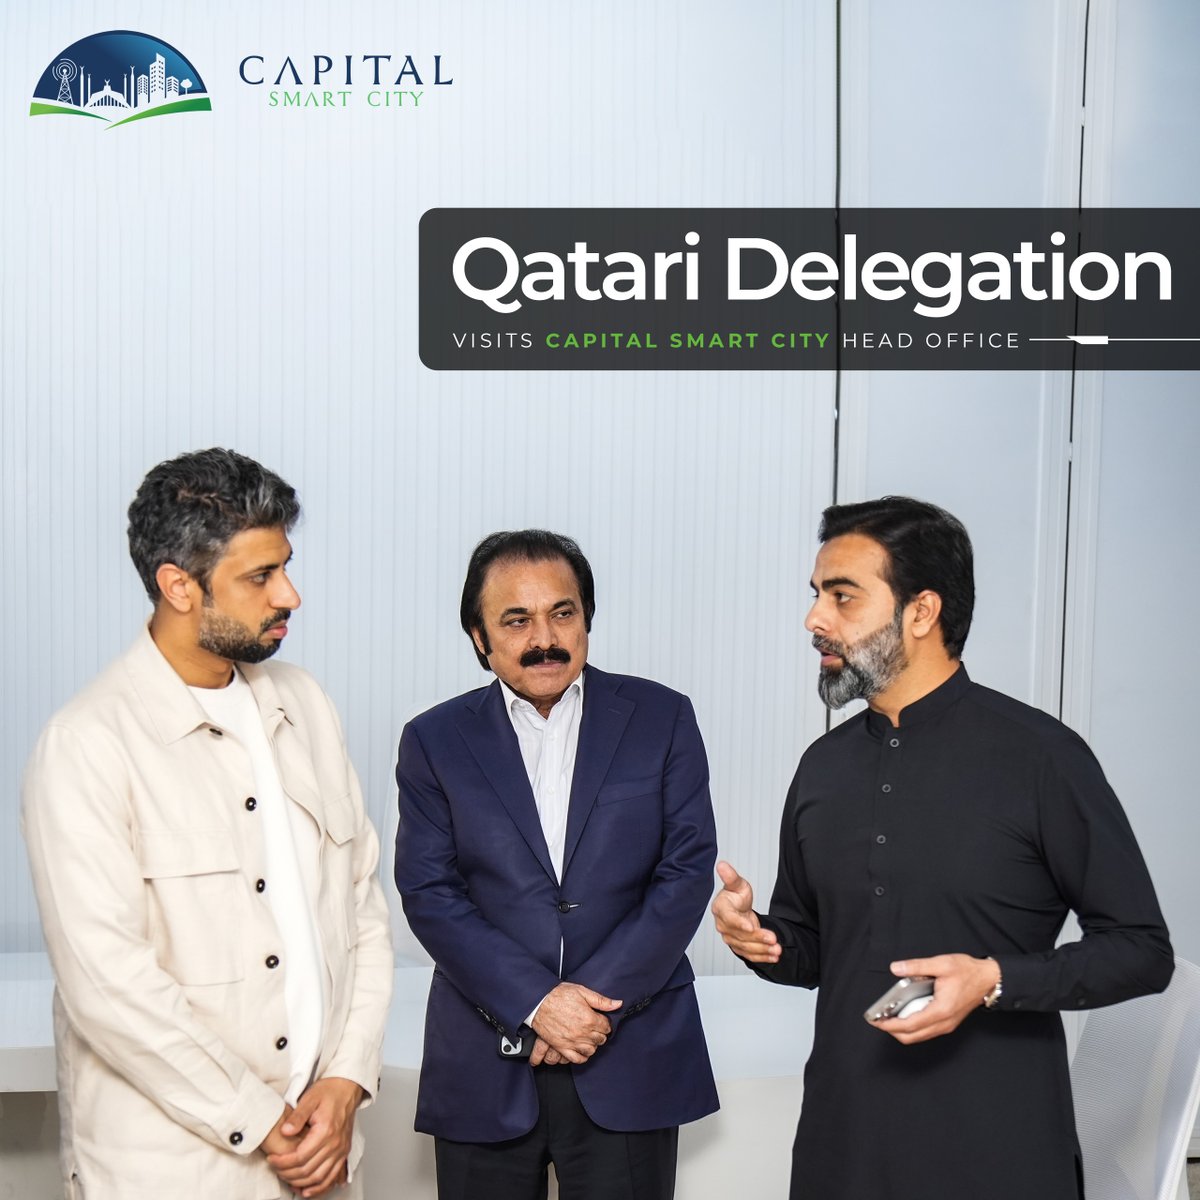 Delighted to welcome the esteemed #Qataridelegation to our F11 Office! Director of Sales and Marketing, Mujeeb Ahmed Khan, alongside Chairman FDHL, Zahid Rafiq, extended a gracious reception to our esteemed guests. #SmartCity #CapitalSmartCity #Qatar